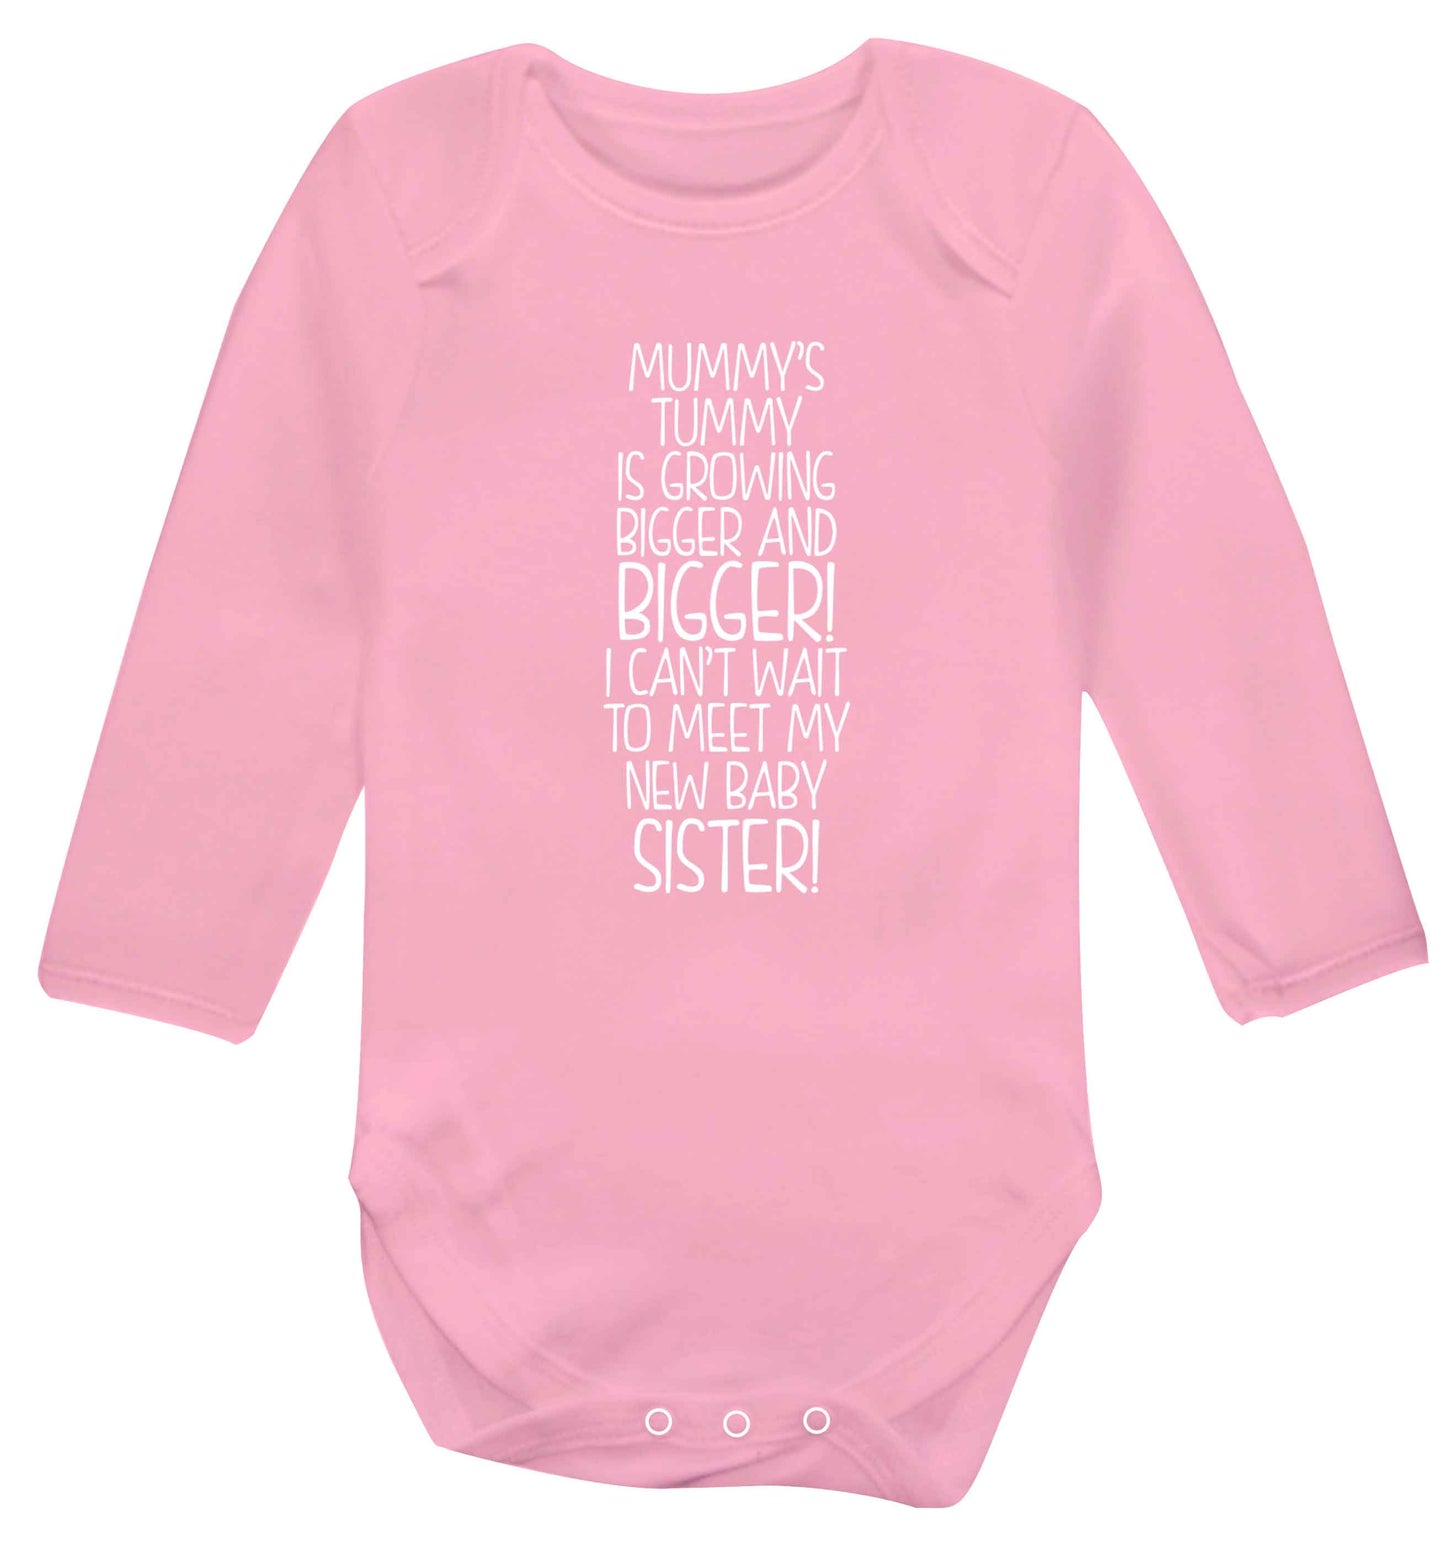 Mummy's tummy is growing bigger and bigger I can't wait to meet my new baby sister! Baby Vest long sleeved pale pink 6-12 months